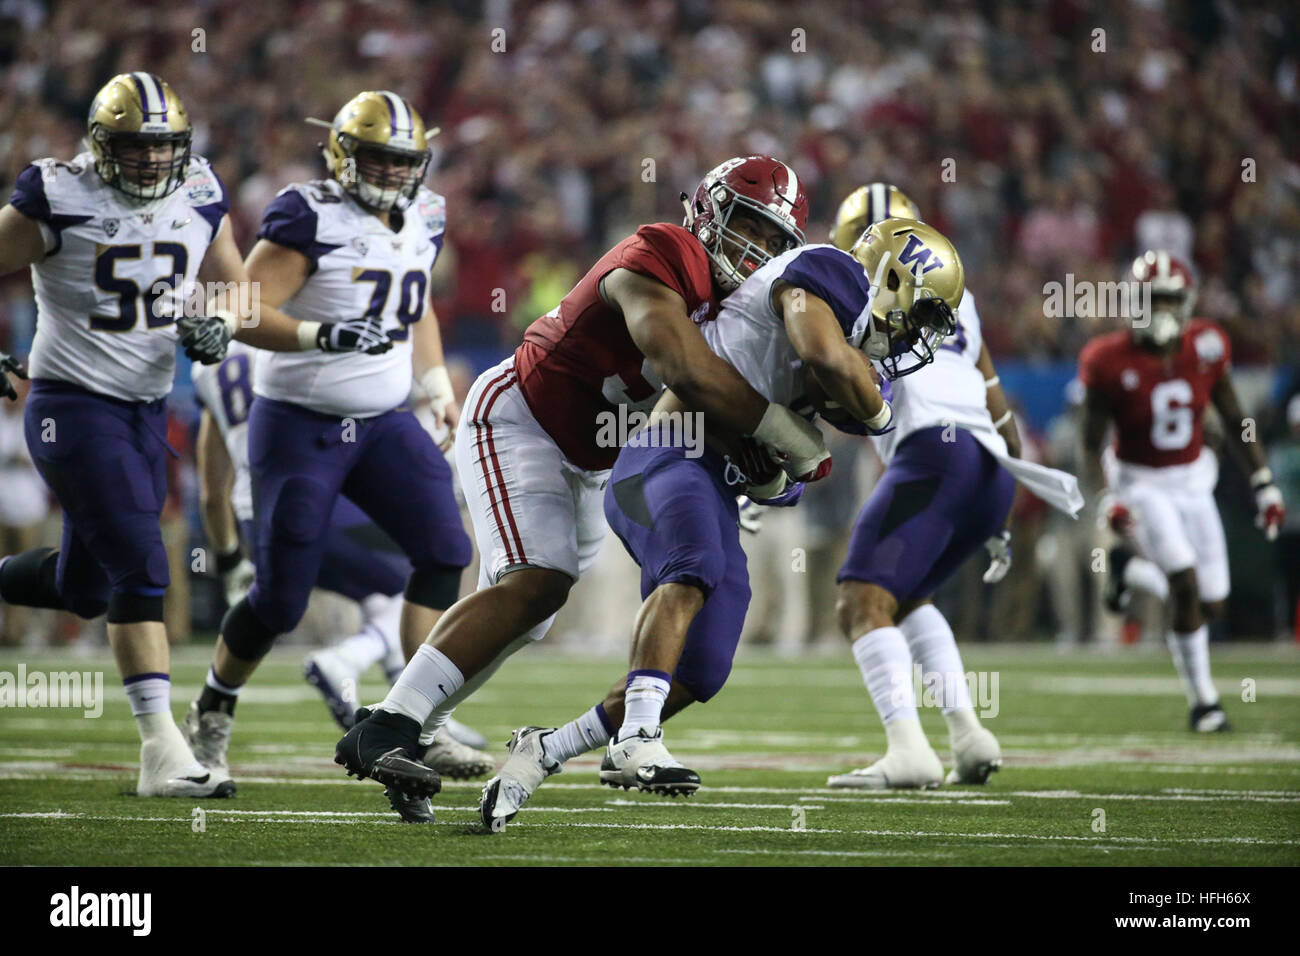 Atlanta, Florida, USA. 31st Dec, 2016. MONICA HERNDON | Times.Alabama Crimson Tide defensive lineman Jonathan Allen (93) stops Washington Huskies running back Myles Gaskin (9) for a loss of 3 yards during the second quarter of the Chick Fil A Peach Bowl at the Georgia Dome in downtown Atlanta on Saturday December 31, 2016. © Monica Herndon/Tampa Bay Times/ZUMA Wire/Alamy Live News Stock Photo